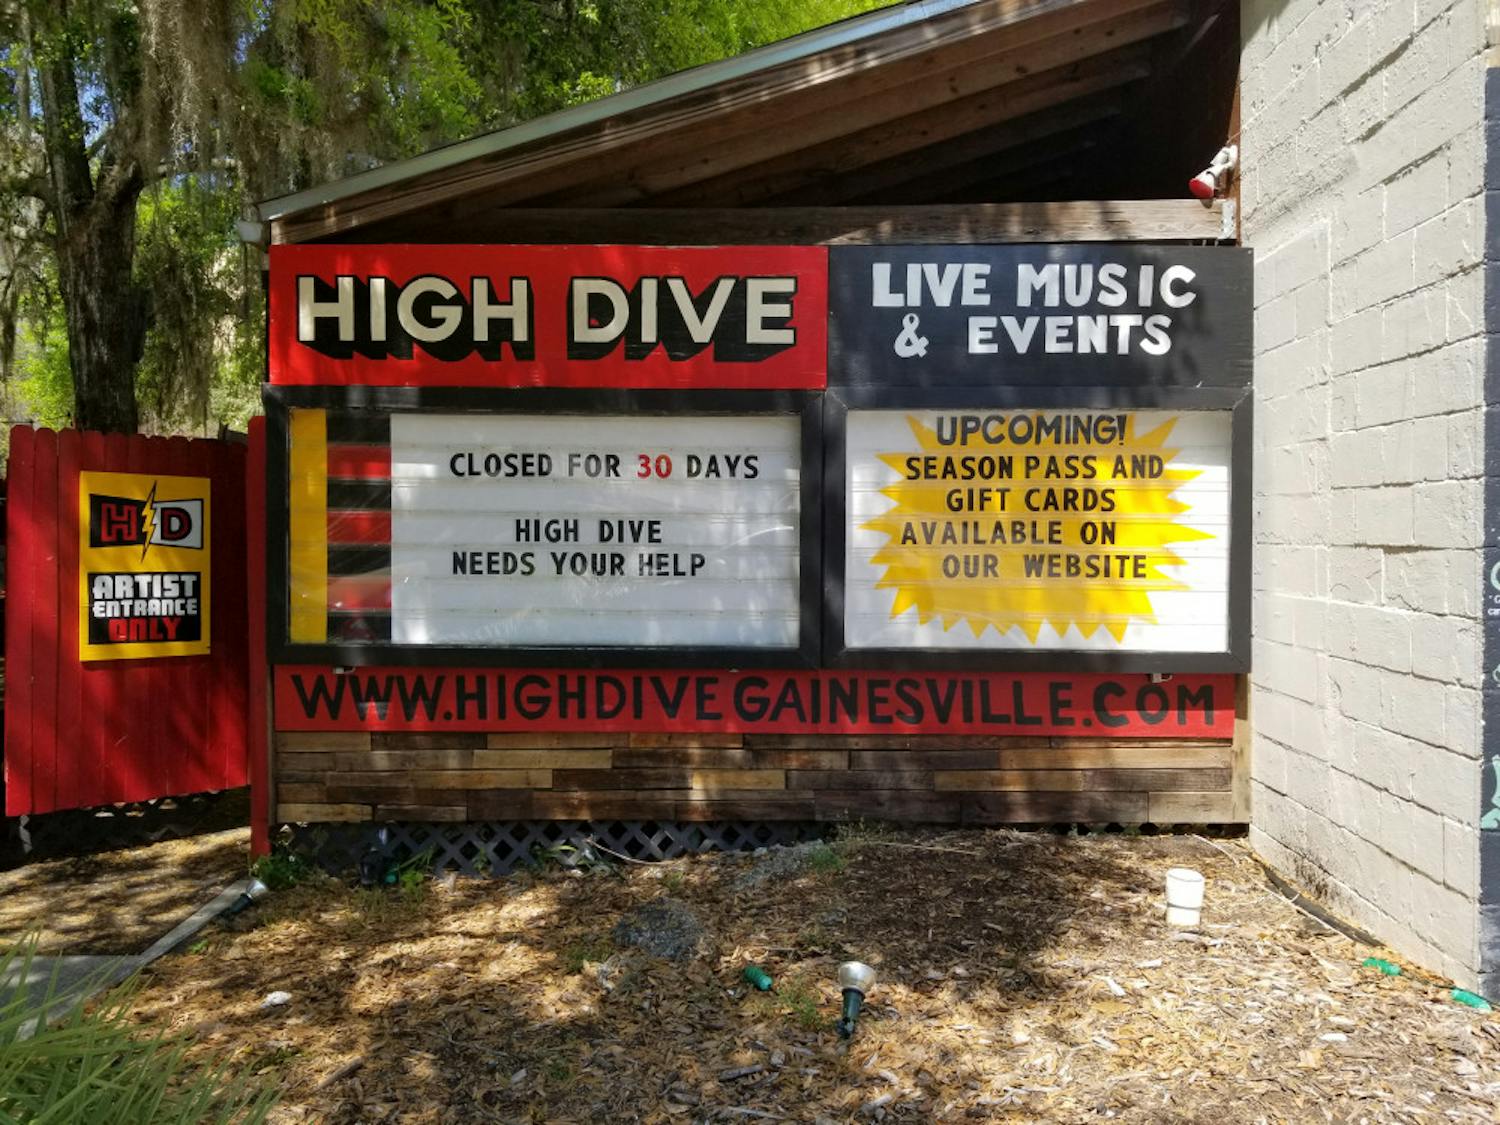 High Dive has launched a GoFundMe page and a Summer 2020 season pass starting at $59 in an effort to offset the strain placed on the venue by the COVID-19 pandemic.